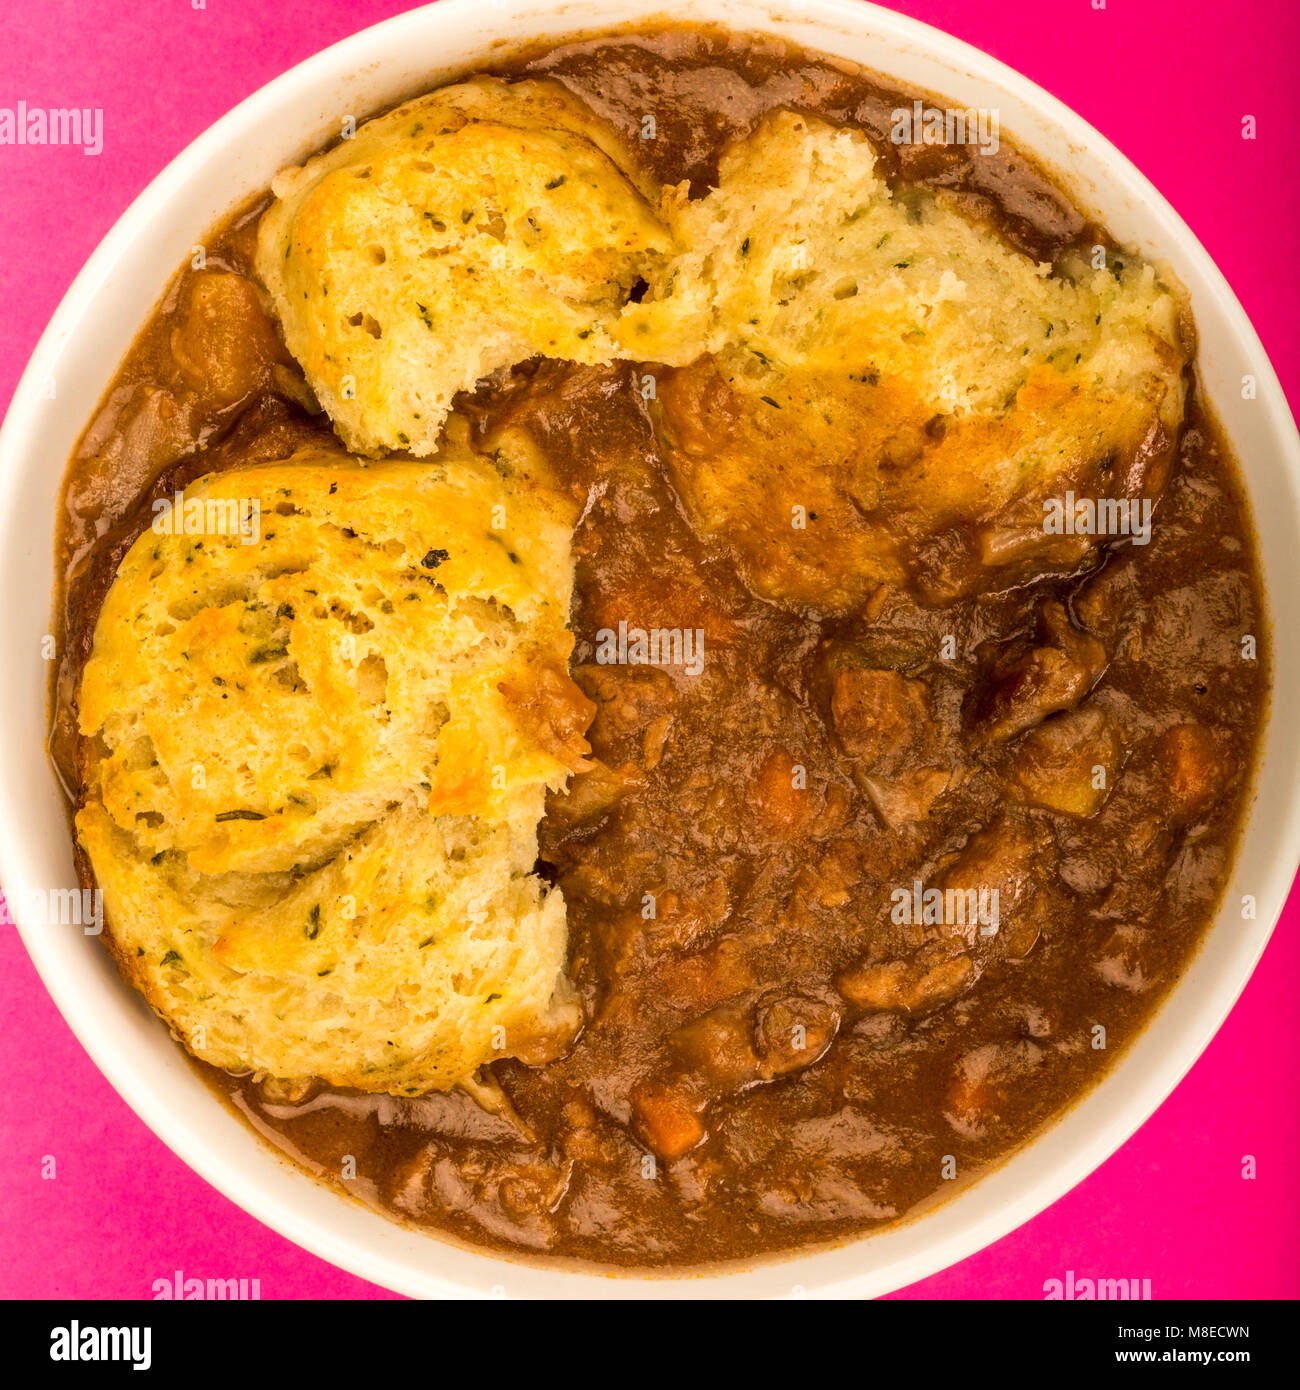 Traditional British Beef Casserole With Dumplings Against A Pink Background Stock Photo